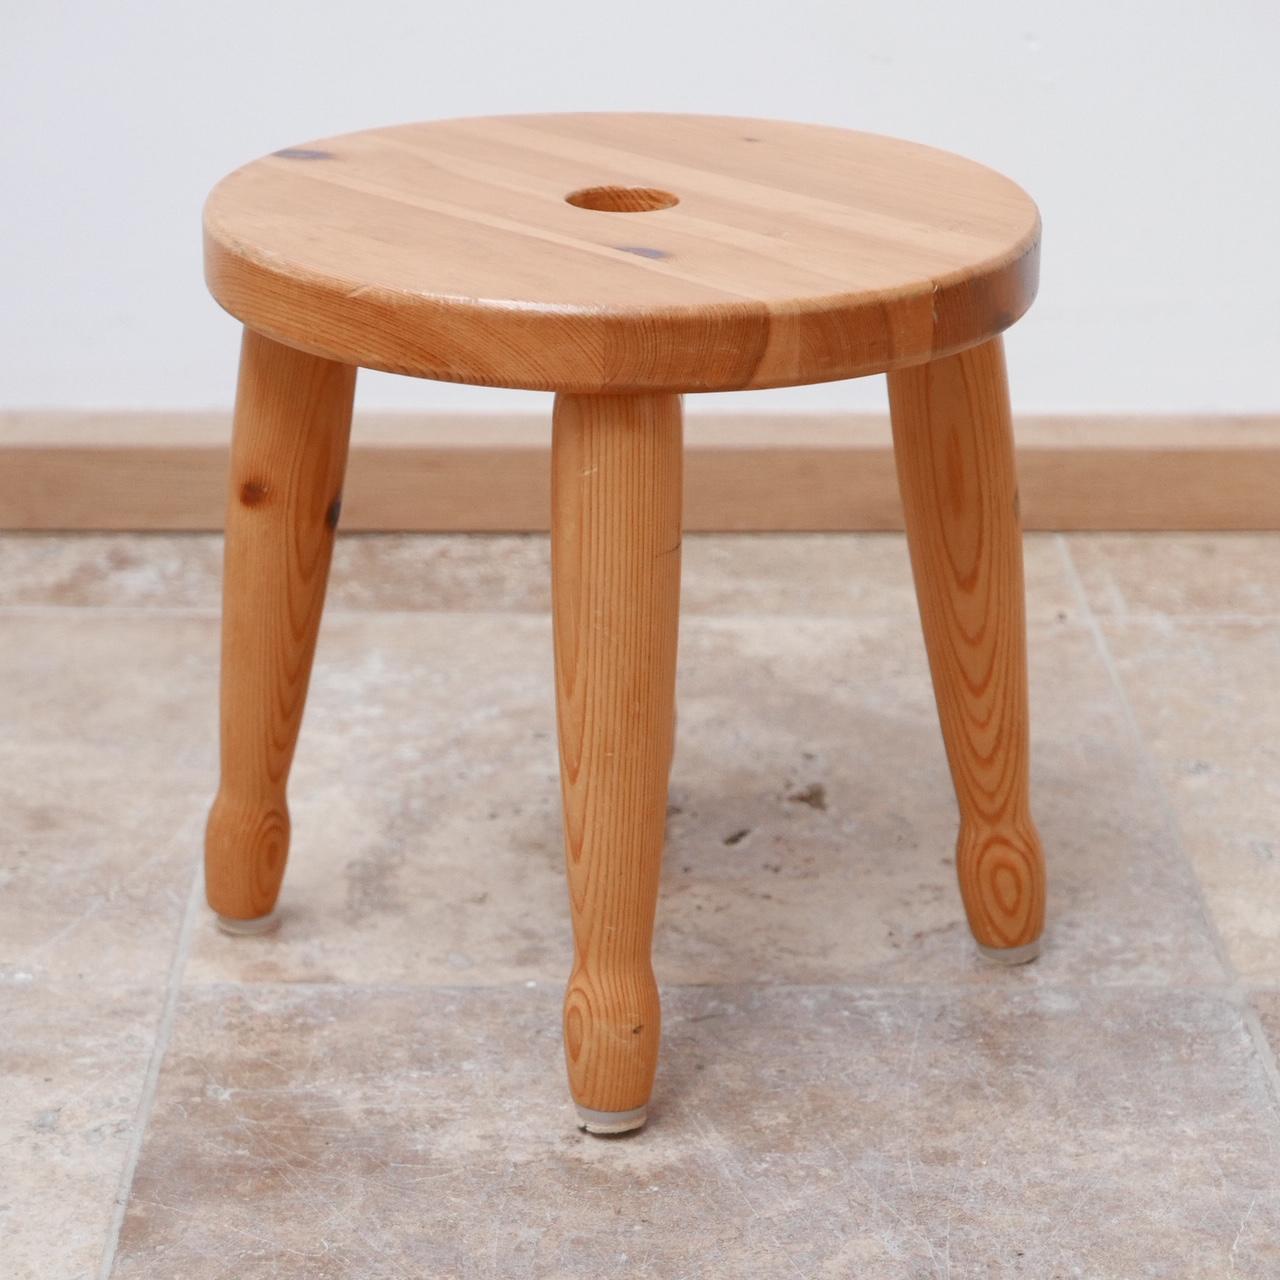 Pine Midcentury Swedish Stool or Side Table In Good Condition For Sale In London, GB